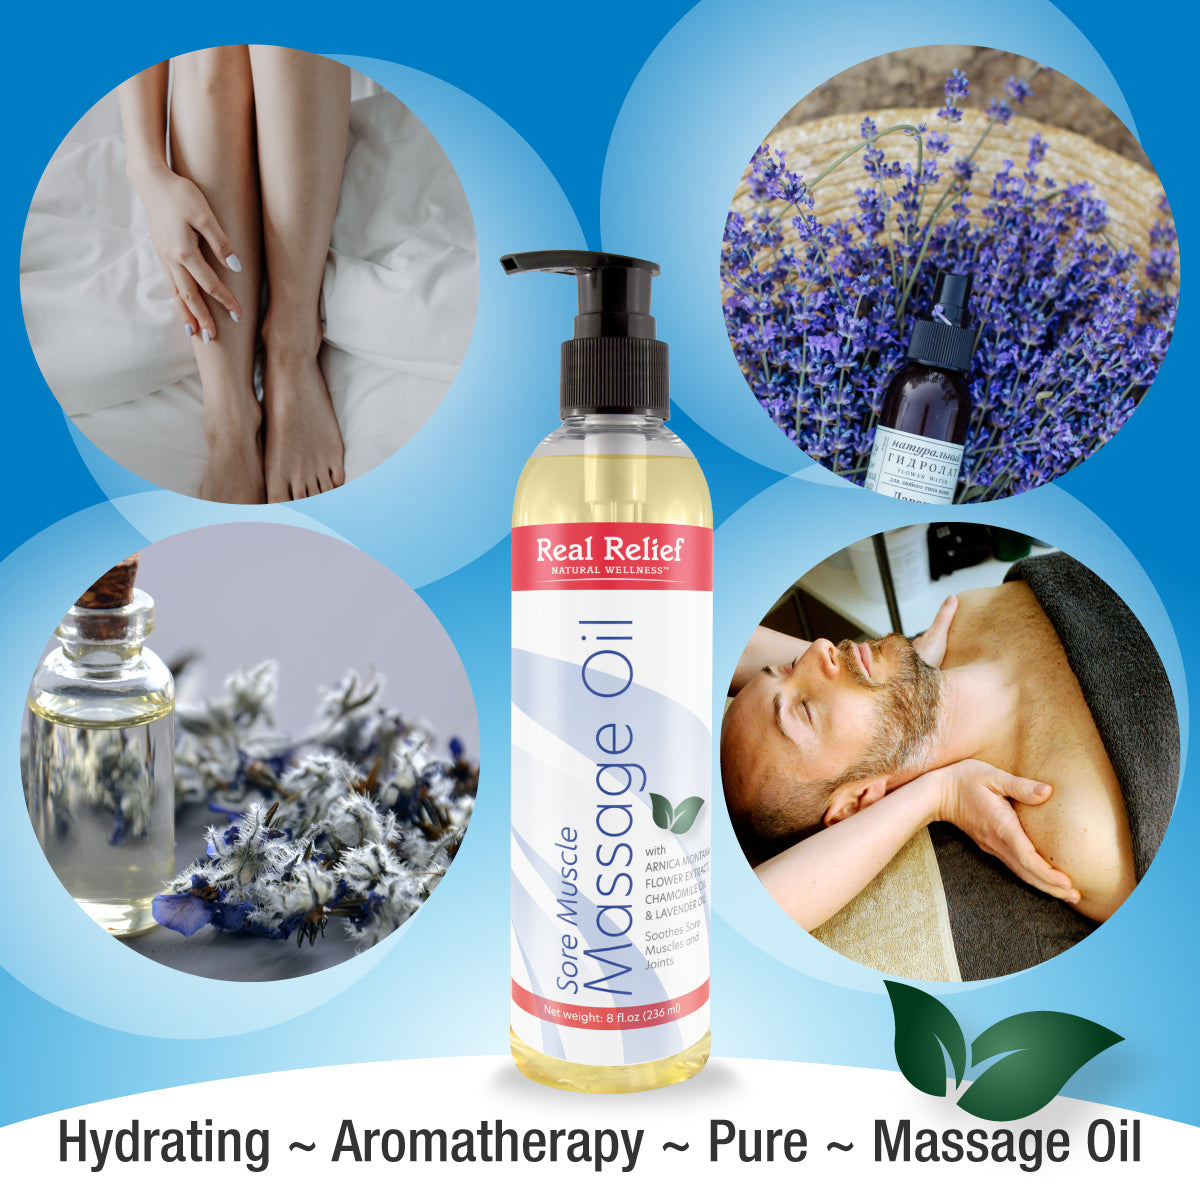 Real Relief Arnica Montana Massage Oil with Chamomile & Lavender Essential Oil, Massage Therapy Oil for Personal or Professional use, 8 fl. Oz.